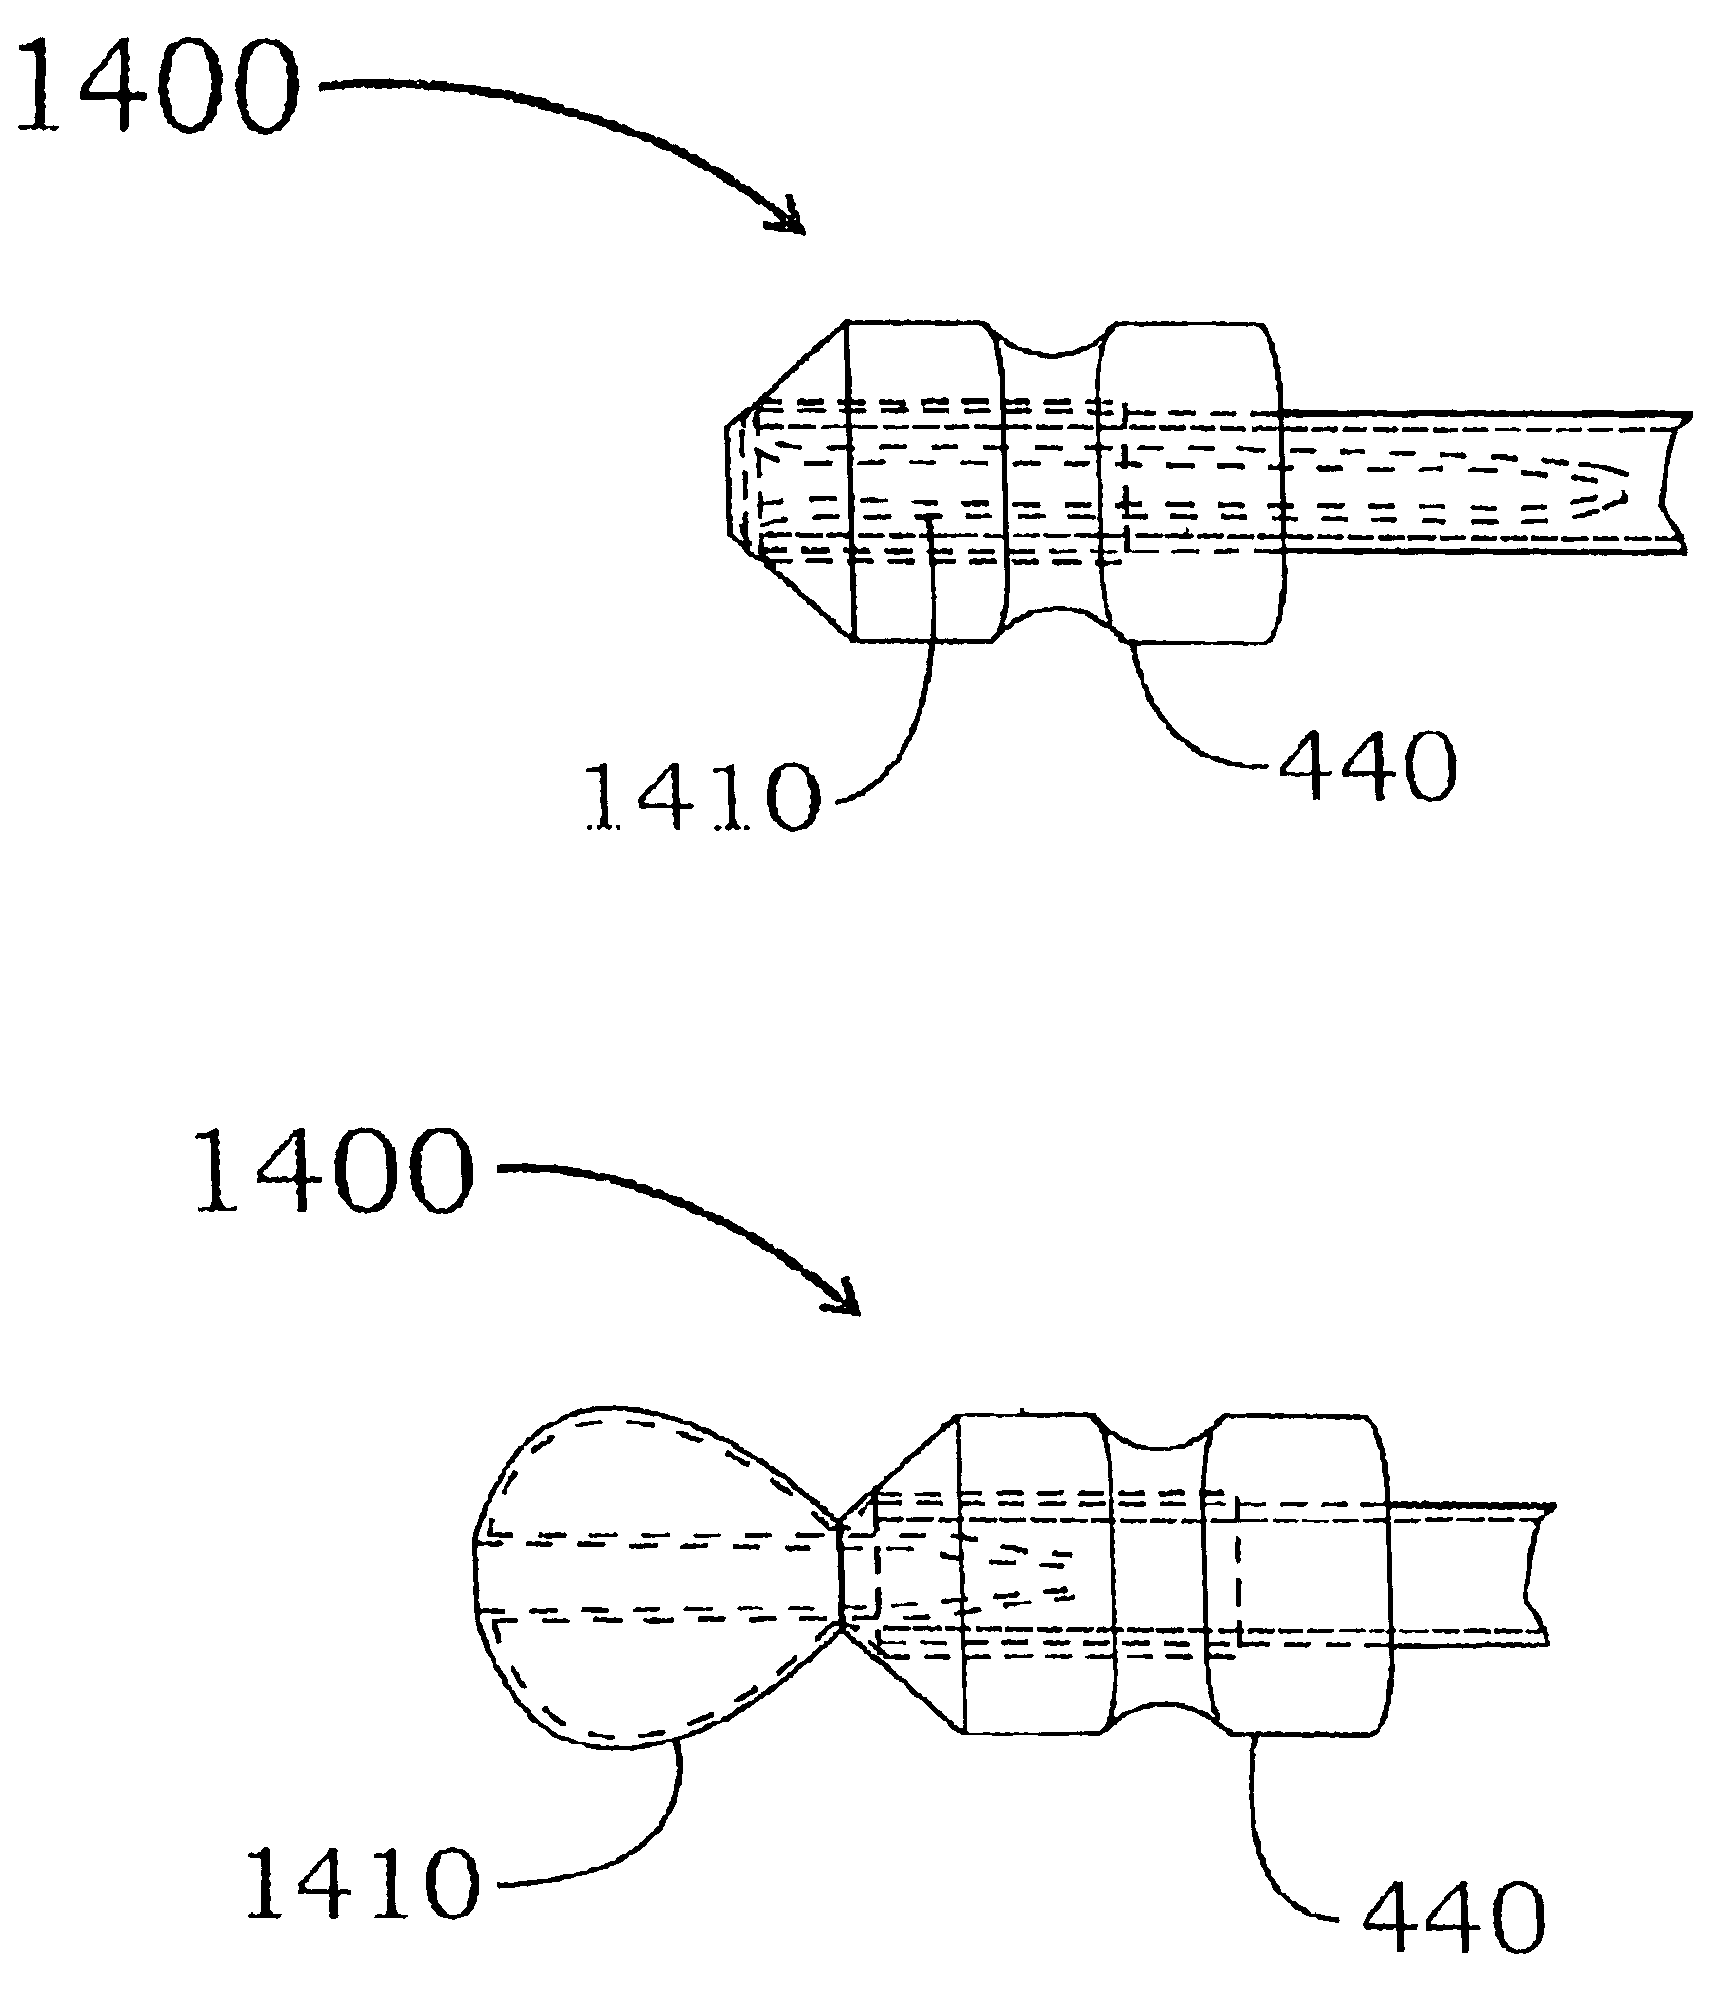 Apparatus for creating a pathway in an animal and methods therefor